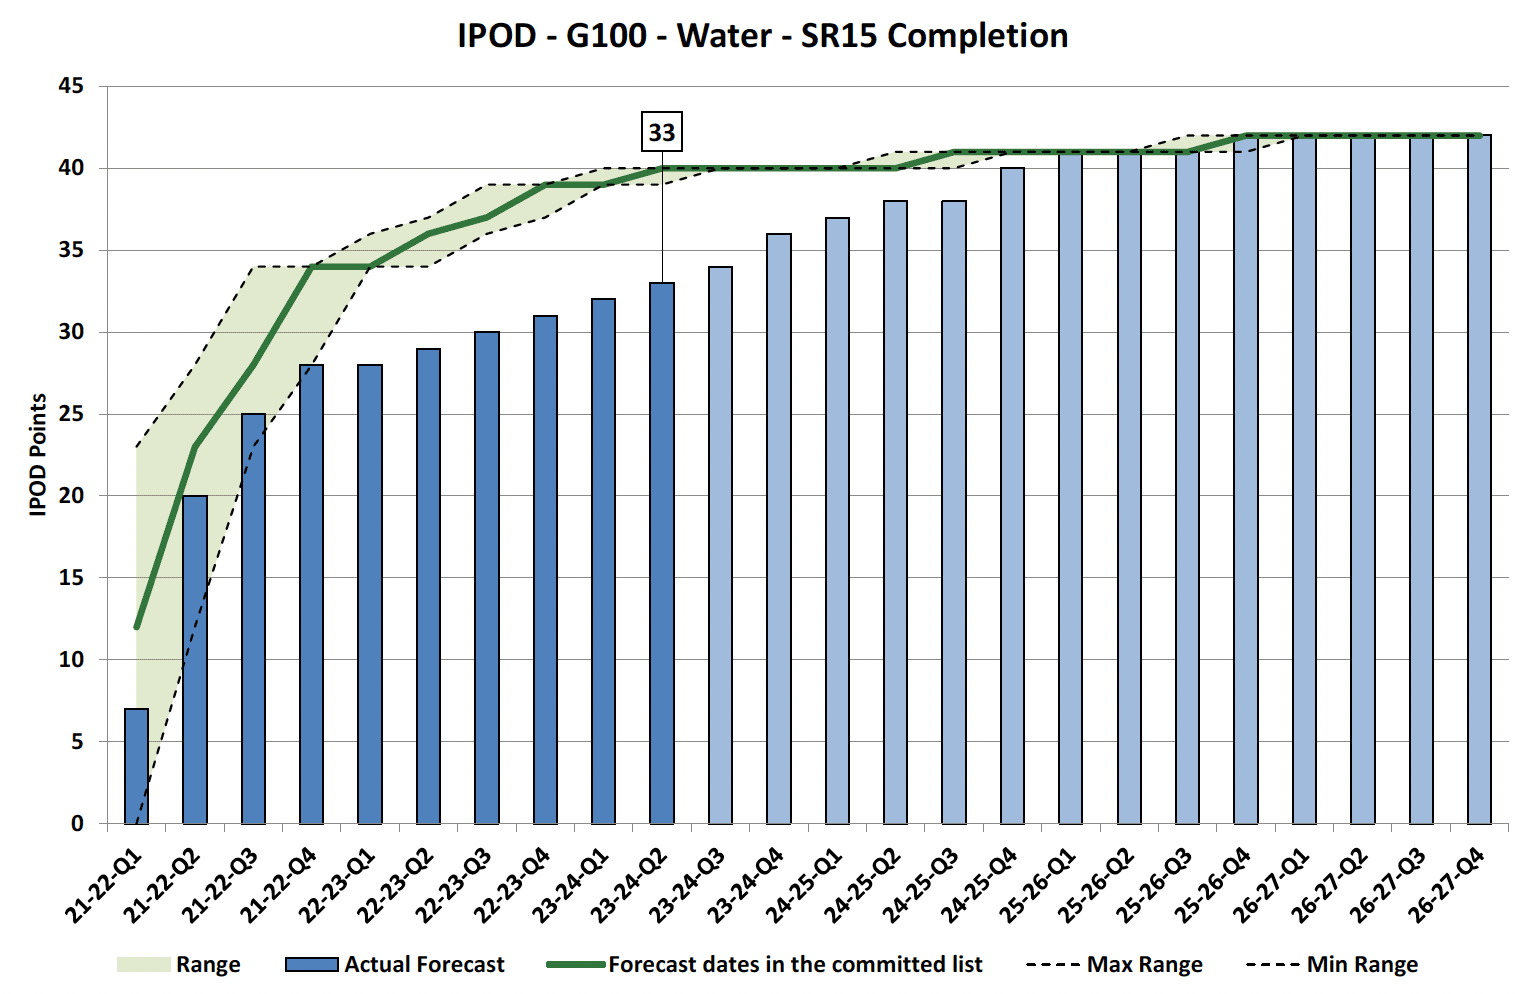 Chart showing IPOD points achieved or forecast for Project Acceptance milestone against target range for SR15 Completion Projects in Water Portfolio